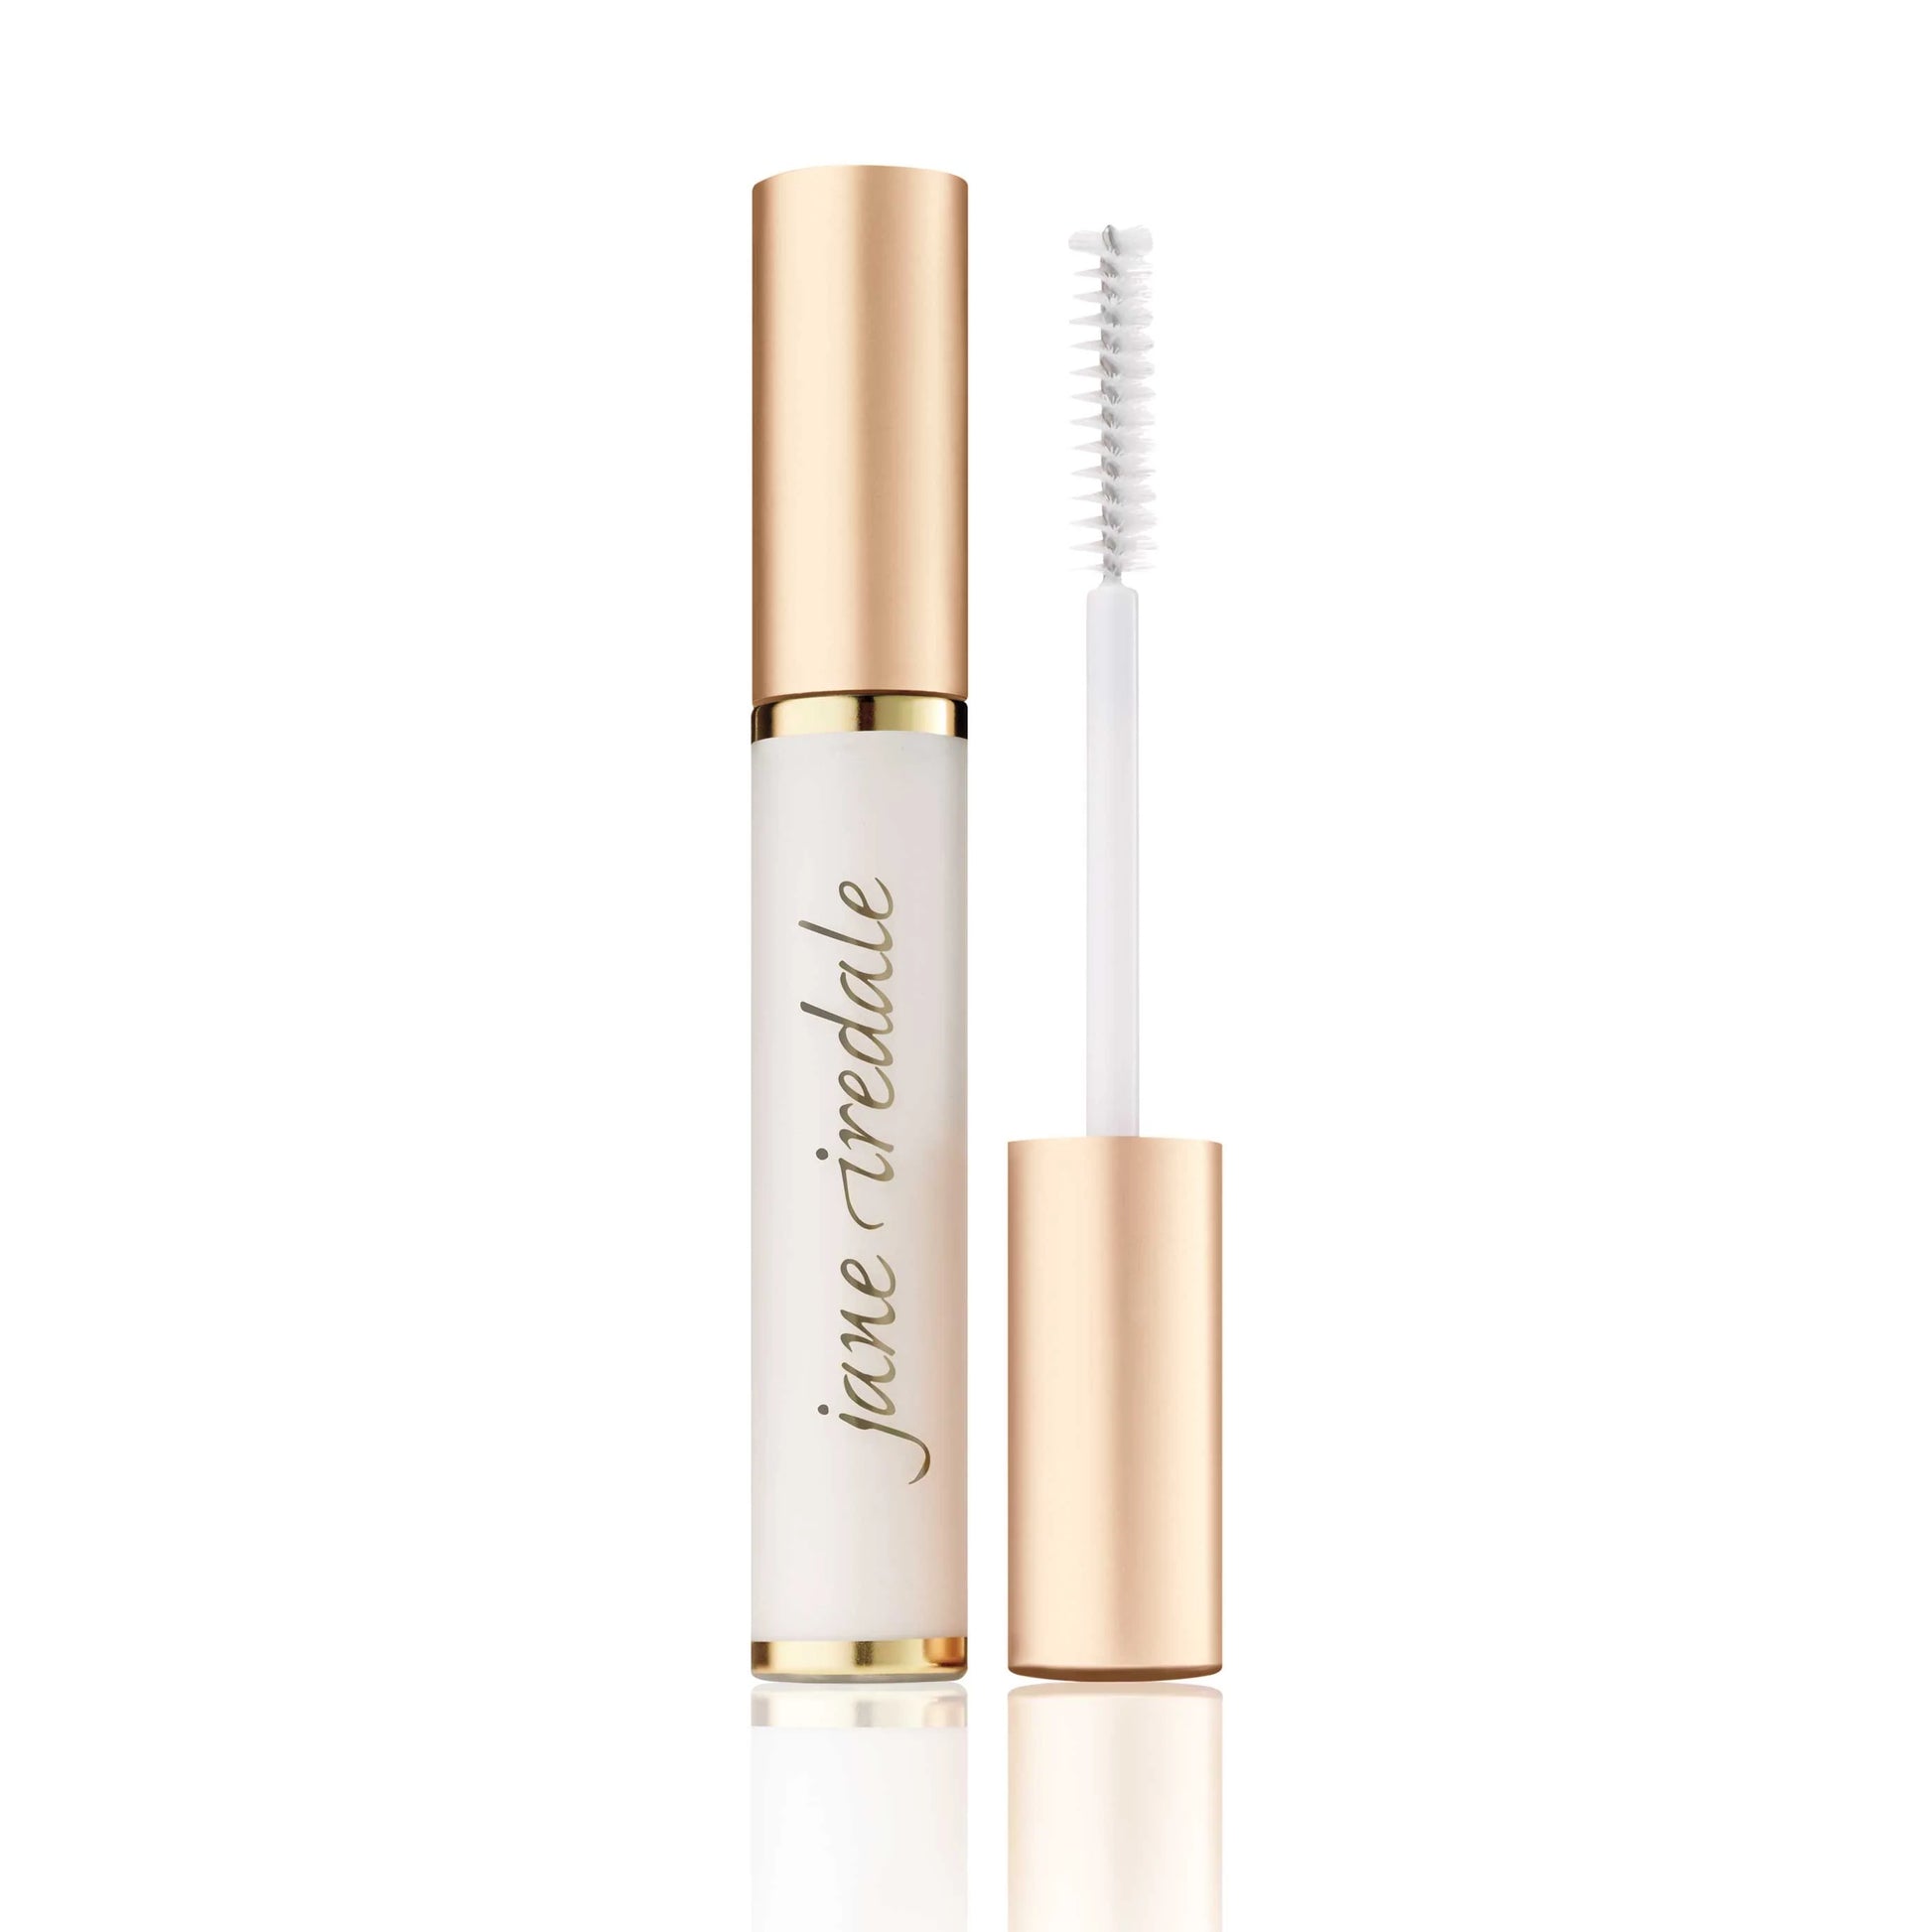 Purelash Extender Jane Iredale Condition Swatch Product